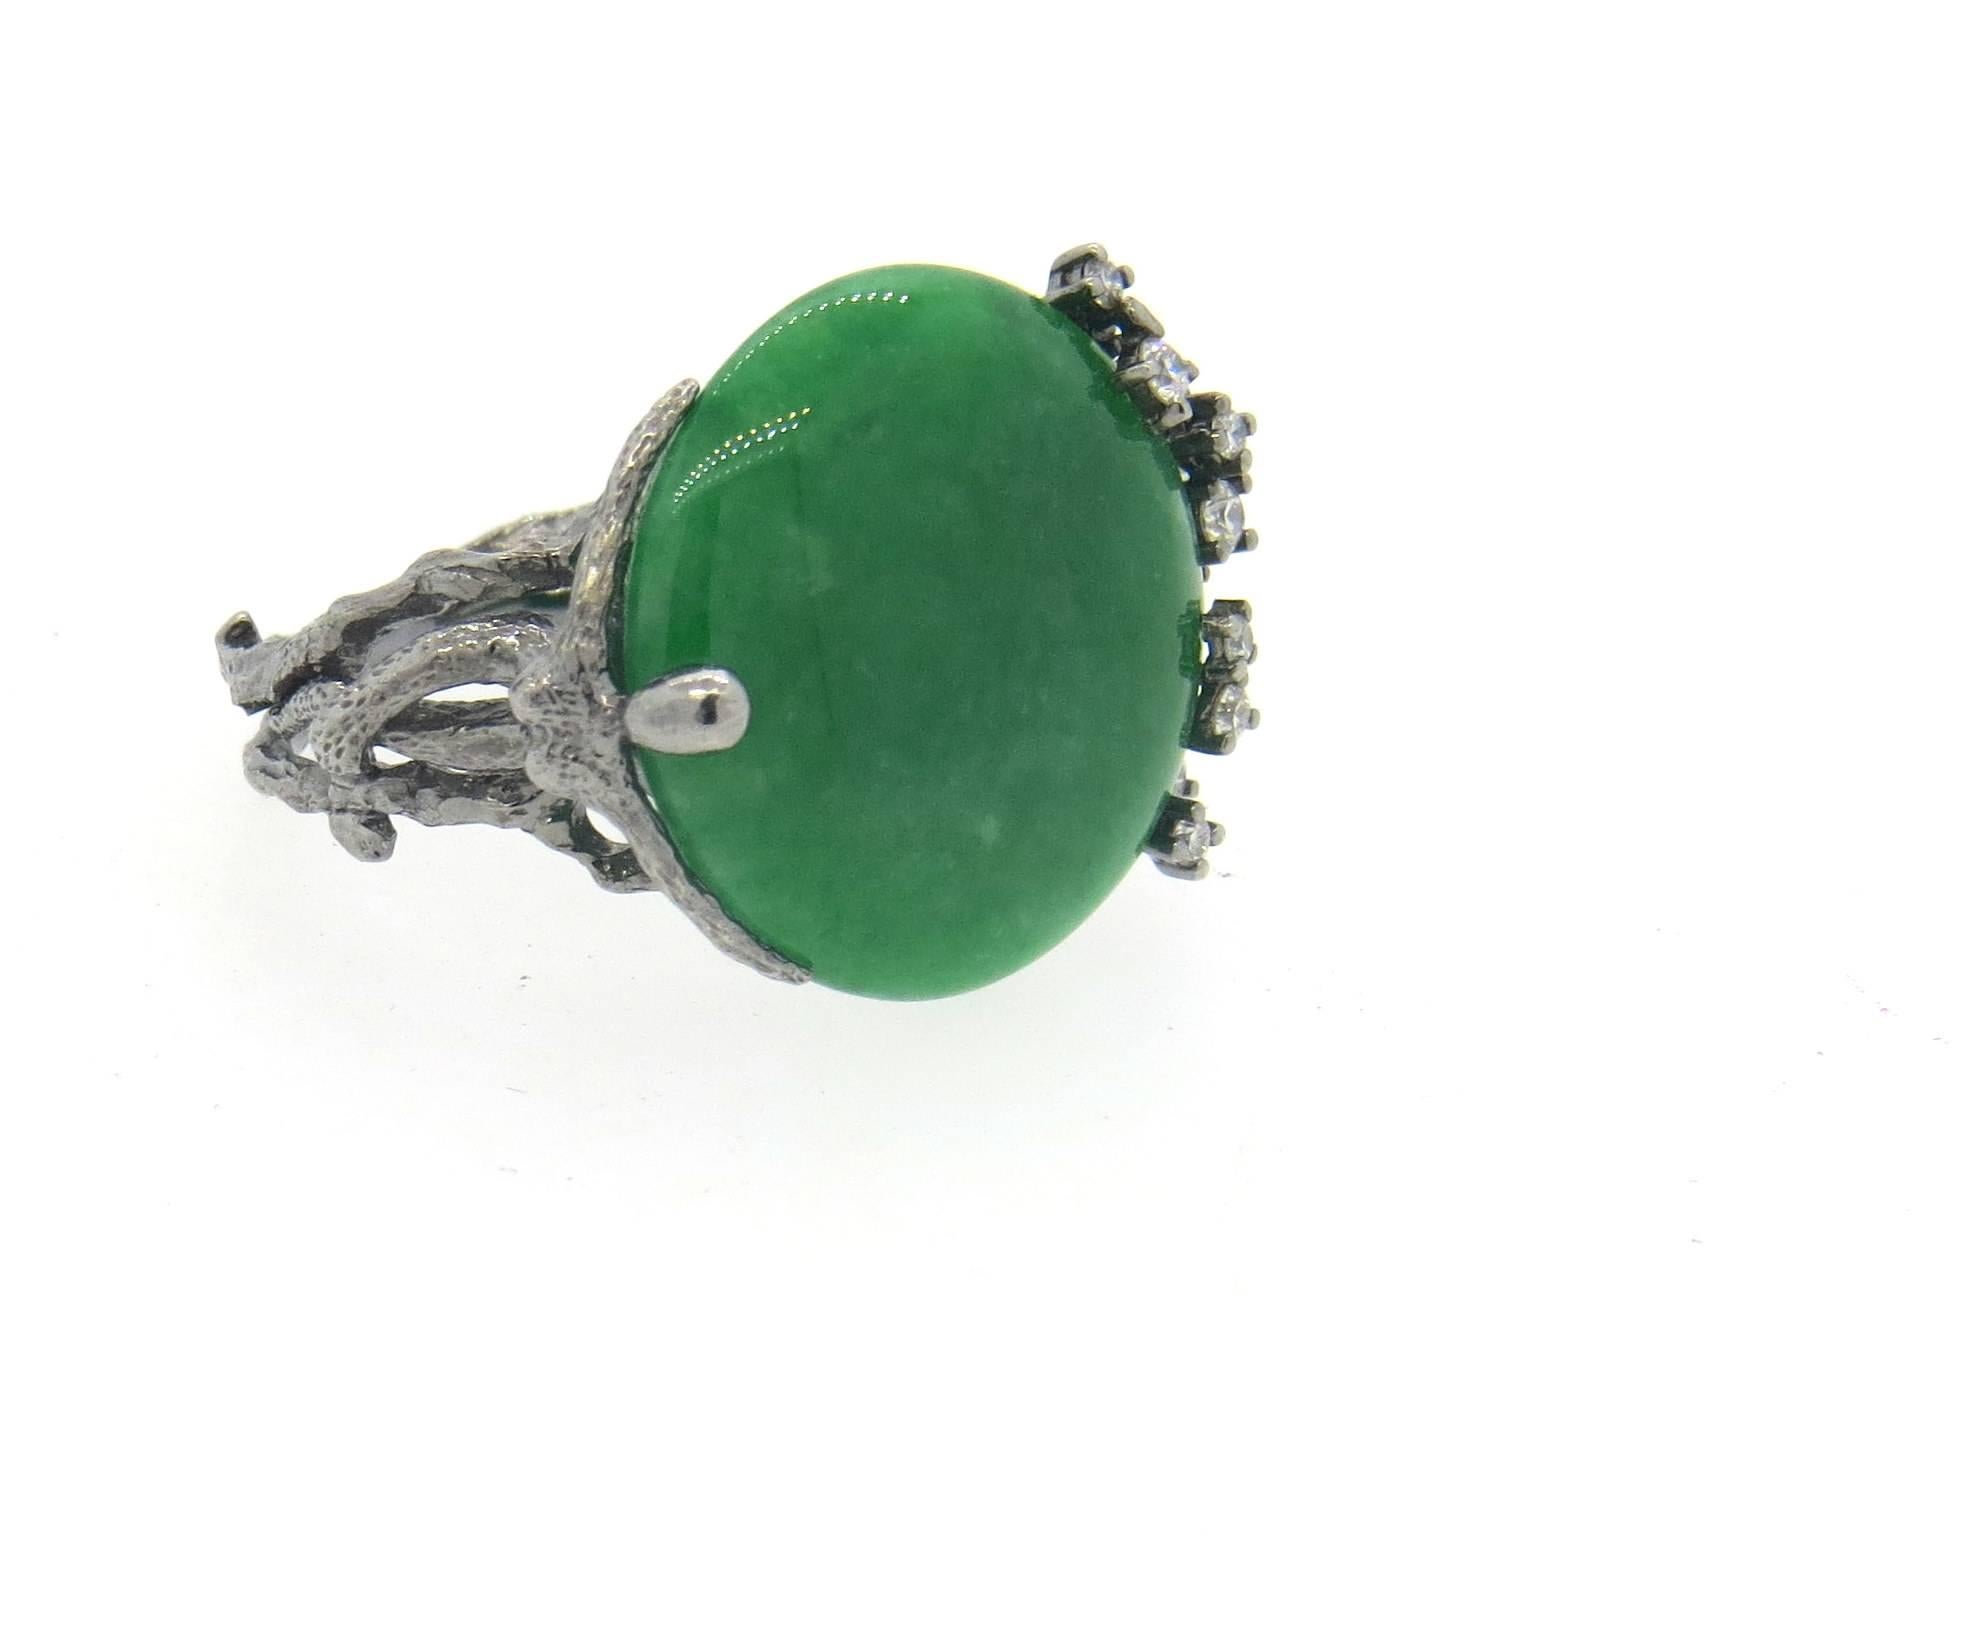 18k blackened white gold naturalistic ring, featuring 12.4ct natural green jadeite jade cabochon as a centerpiece, surrounded with approximately 0.30ctw in diamonds. Ring is a size 8, top measures 19mm x 25mm. marked 750. Weight of the piece - 9.3